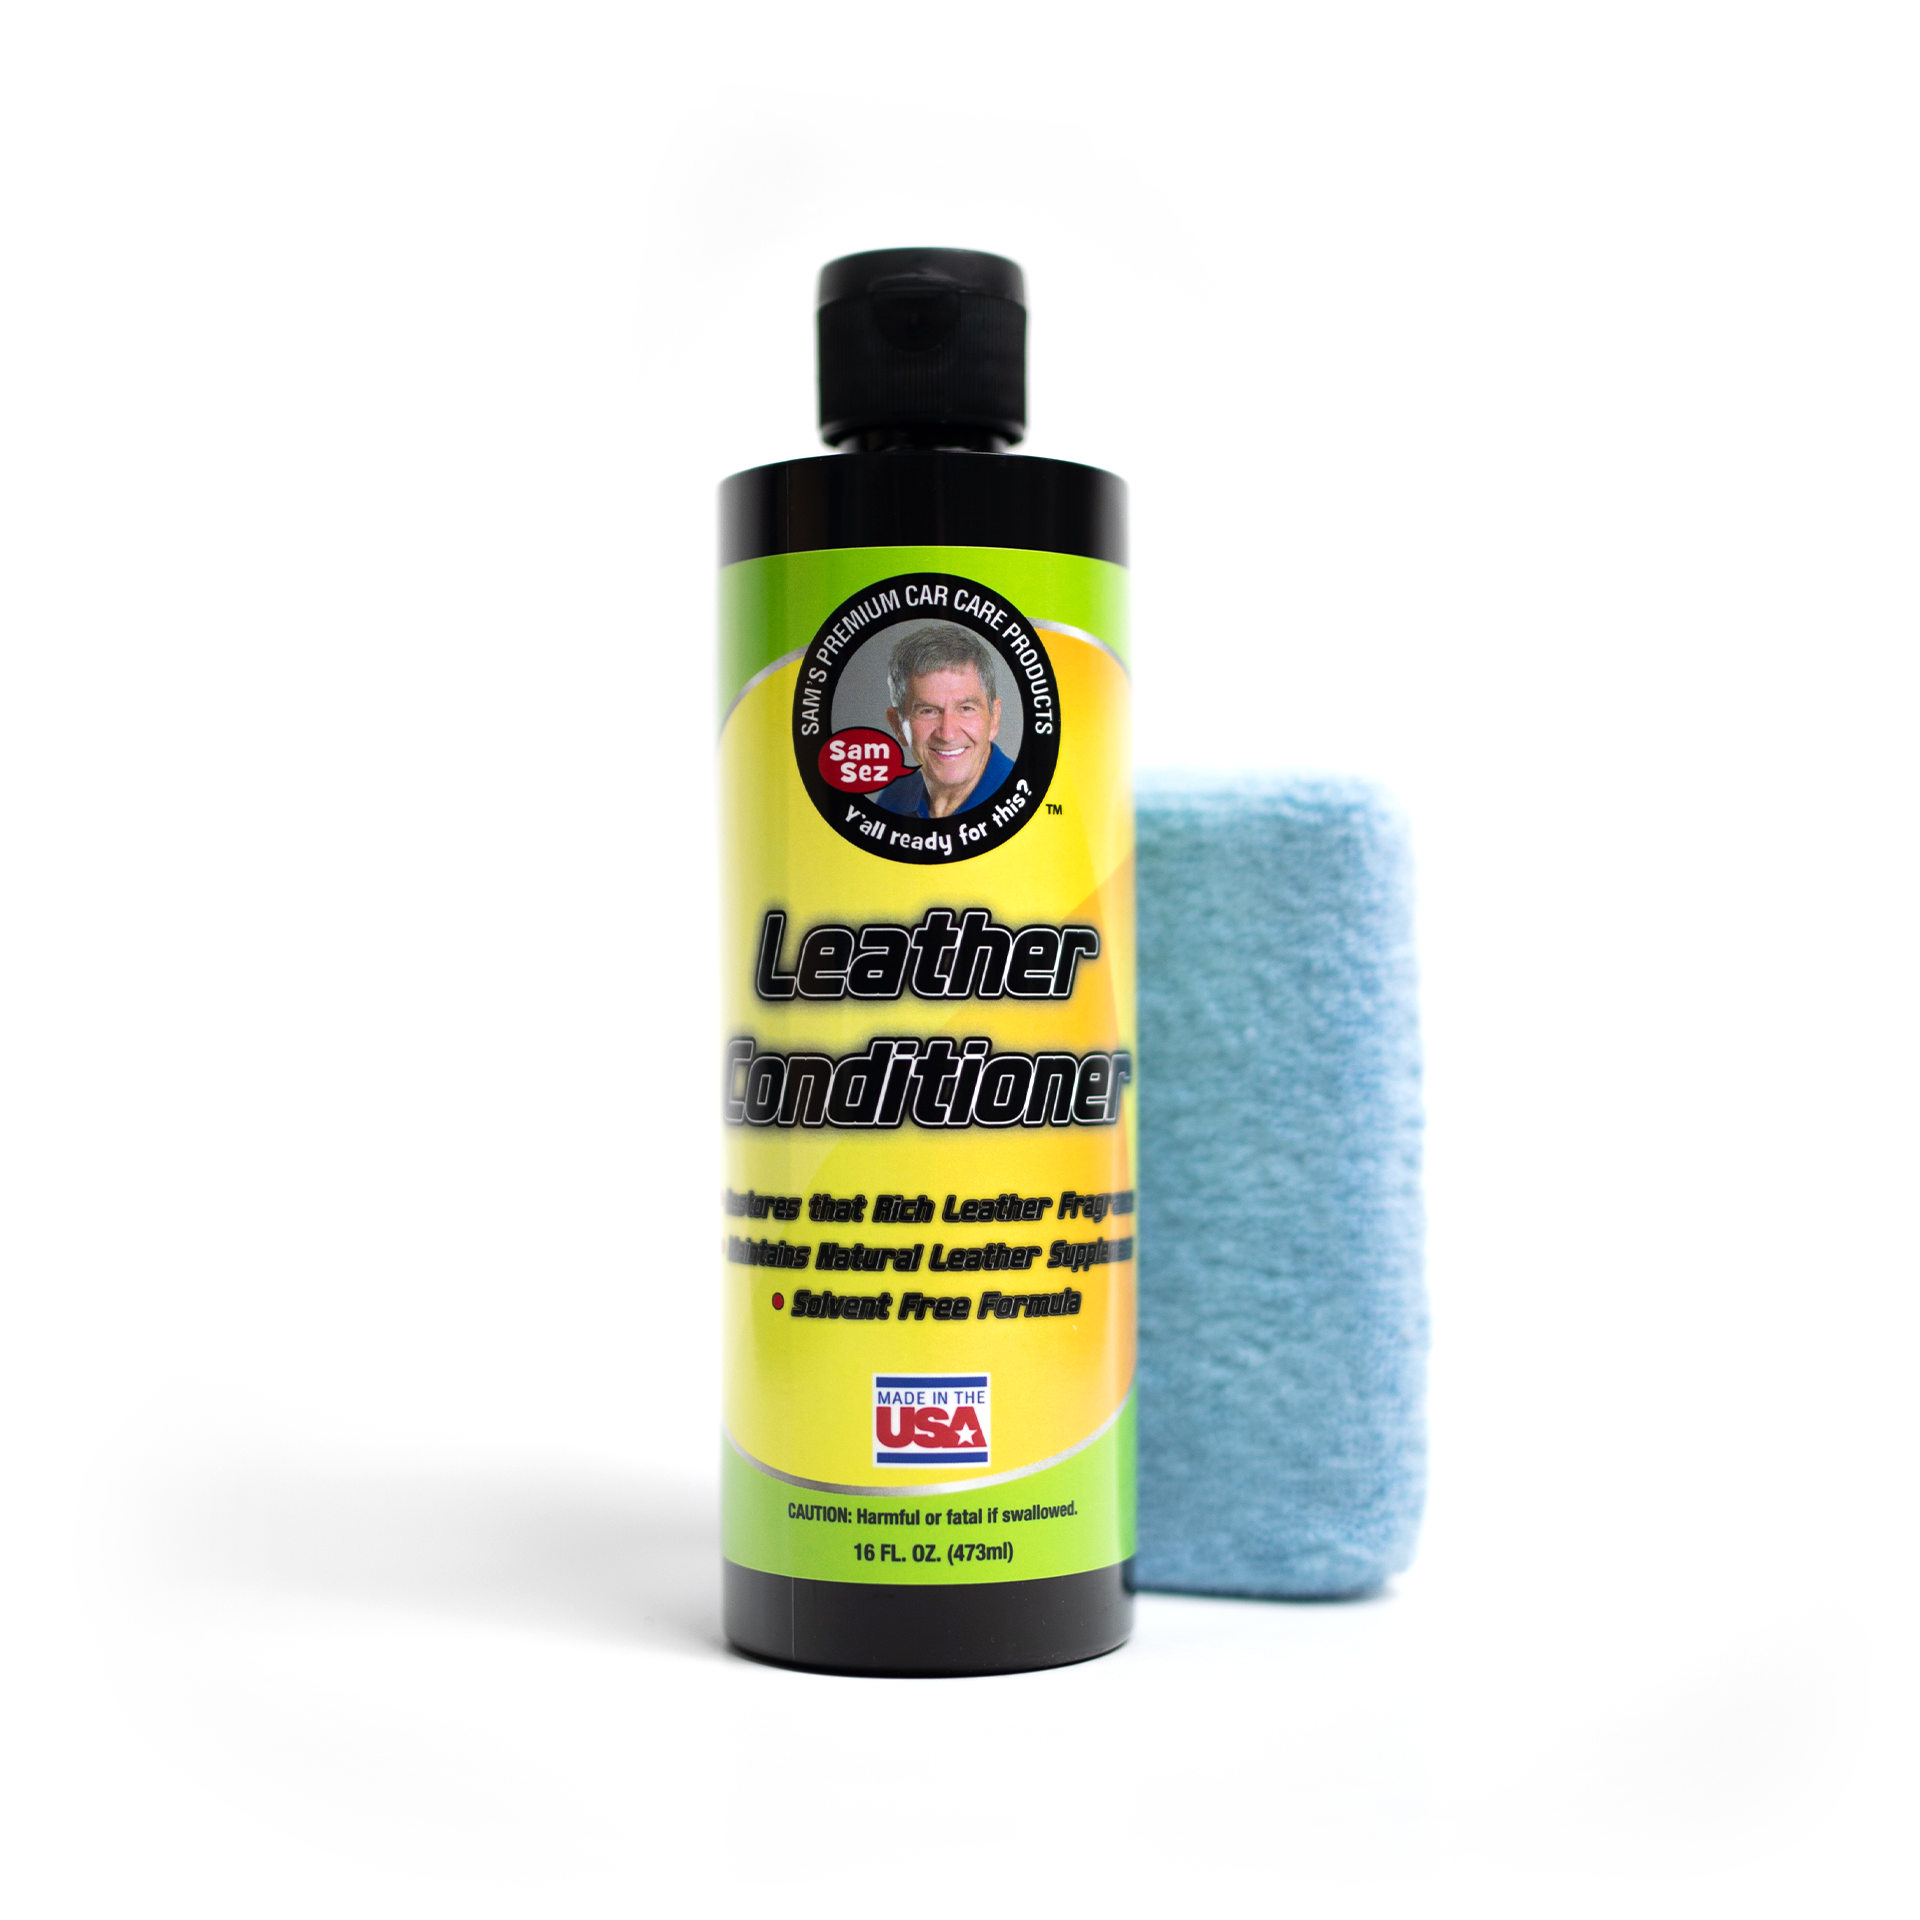 Buy Chemical Guys Leather Conditioner